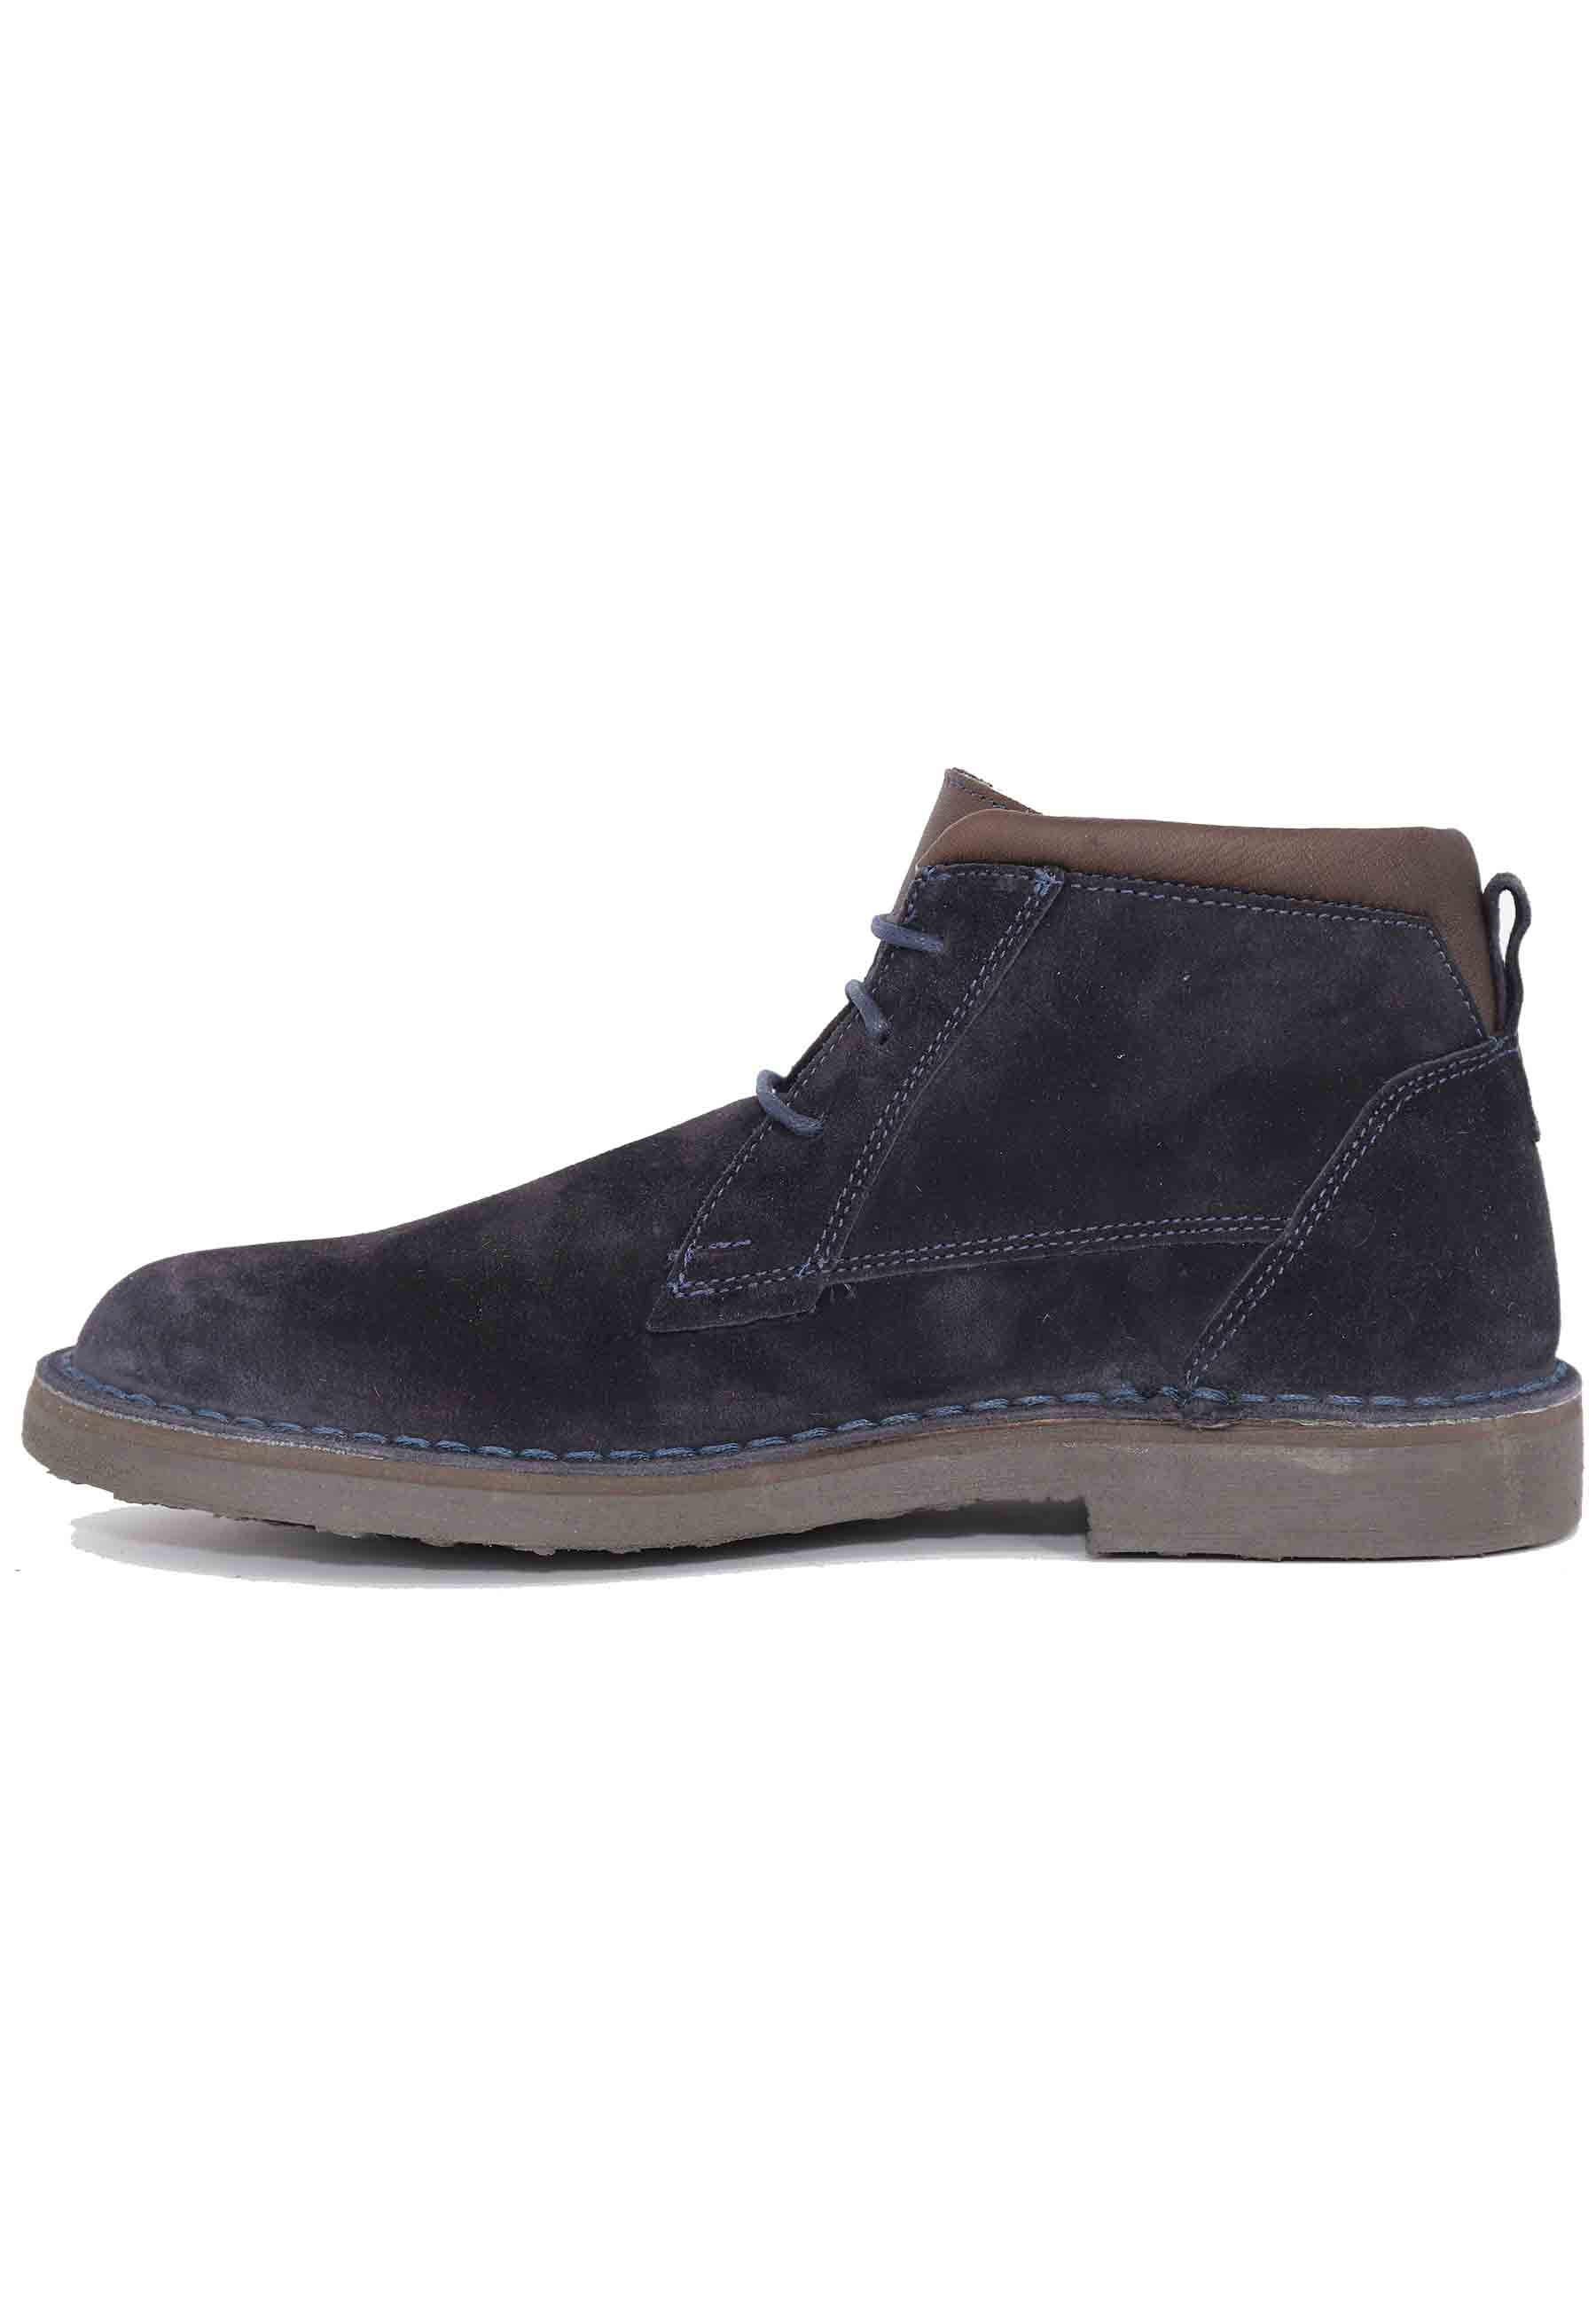 Men's lace-up ankle boots in blue suede with rubber sole